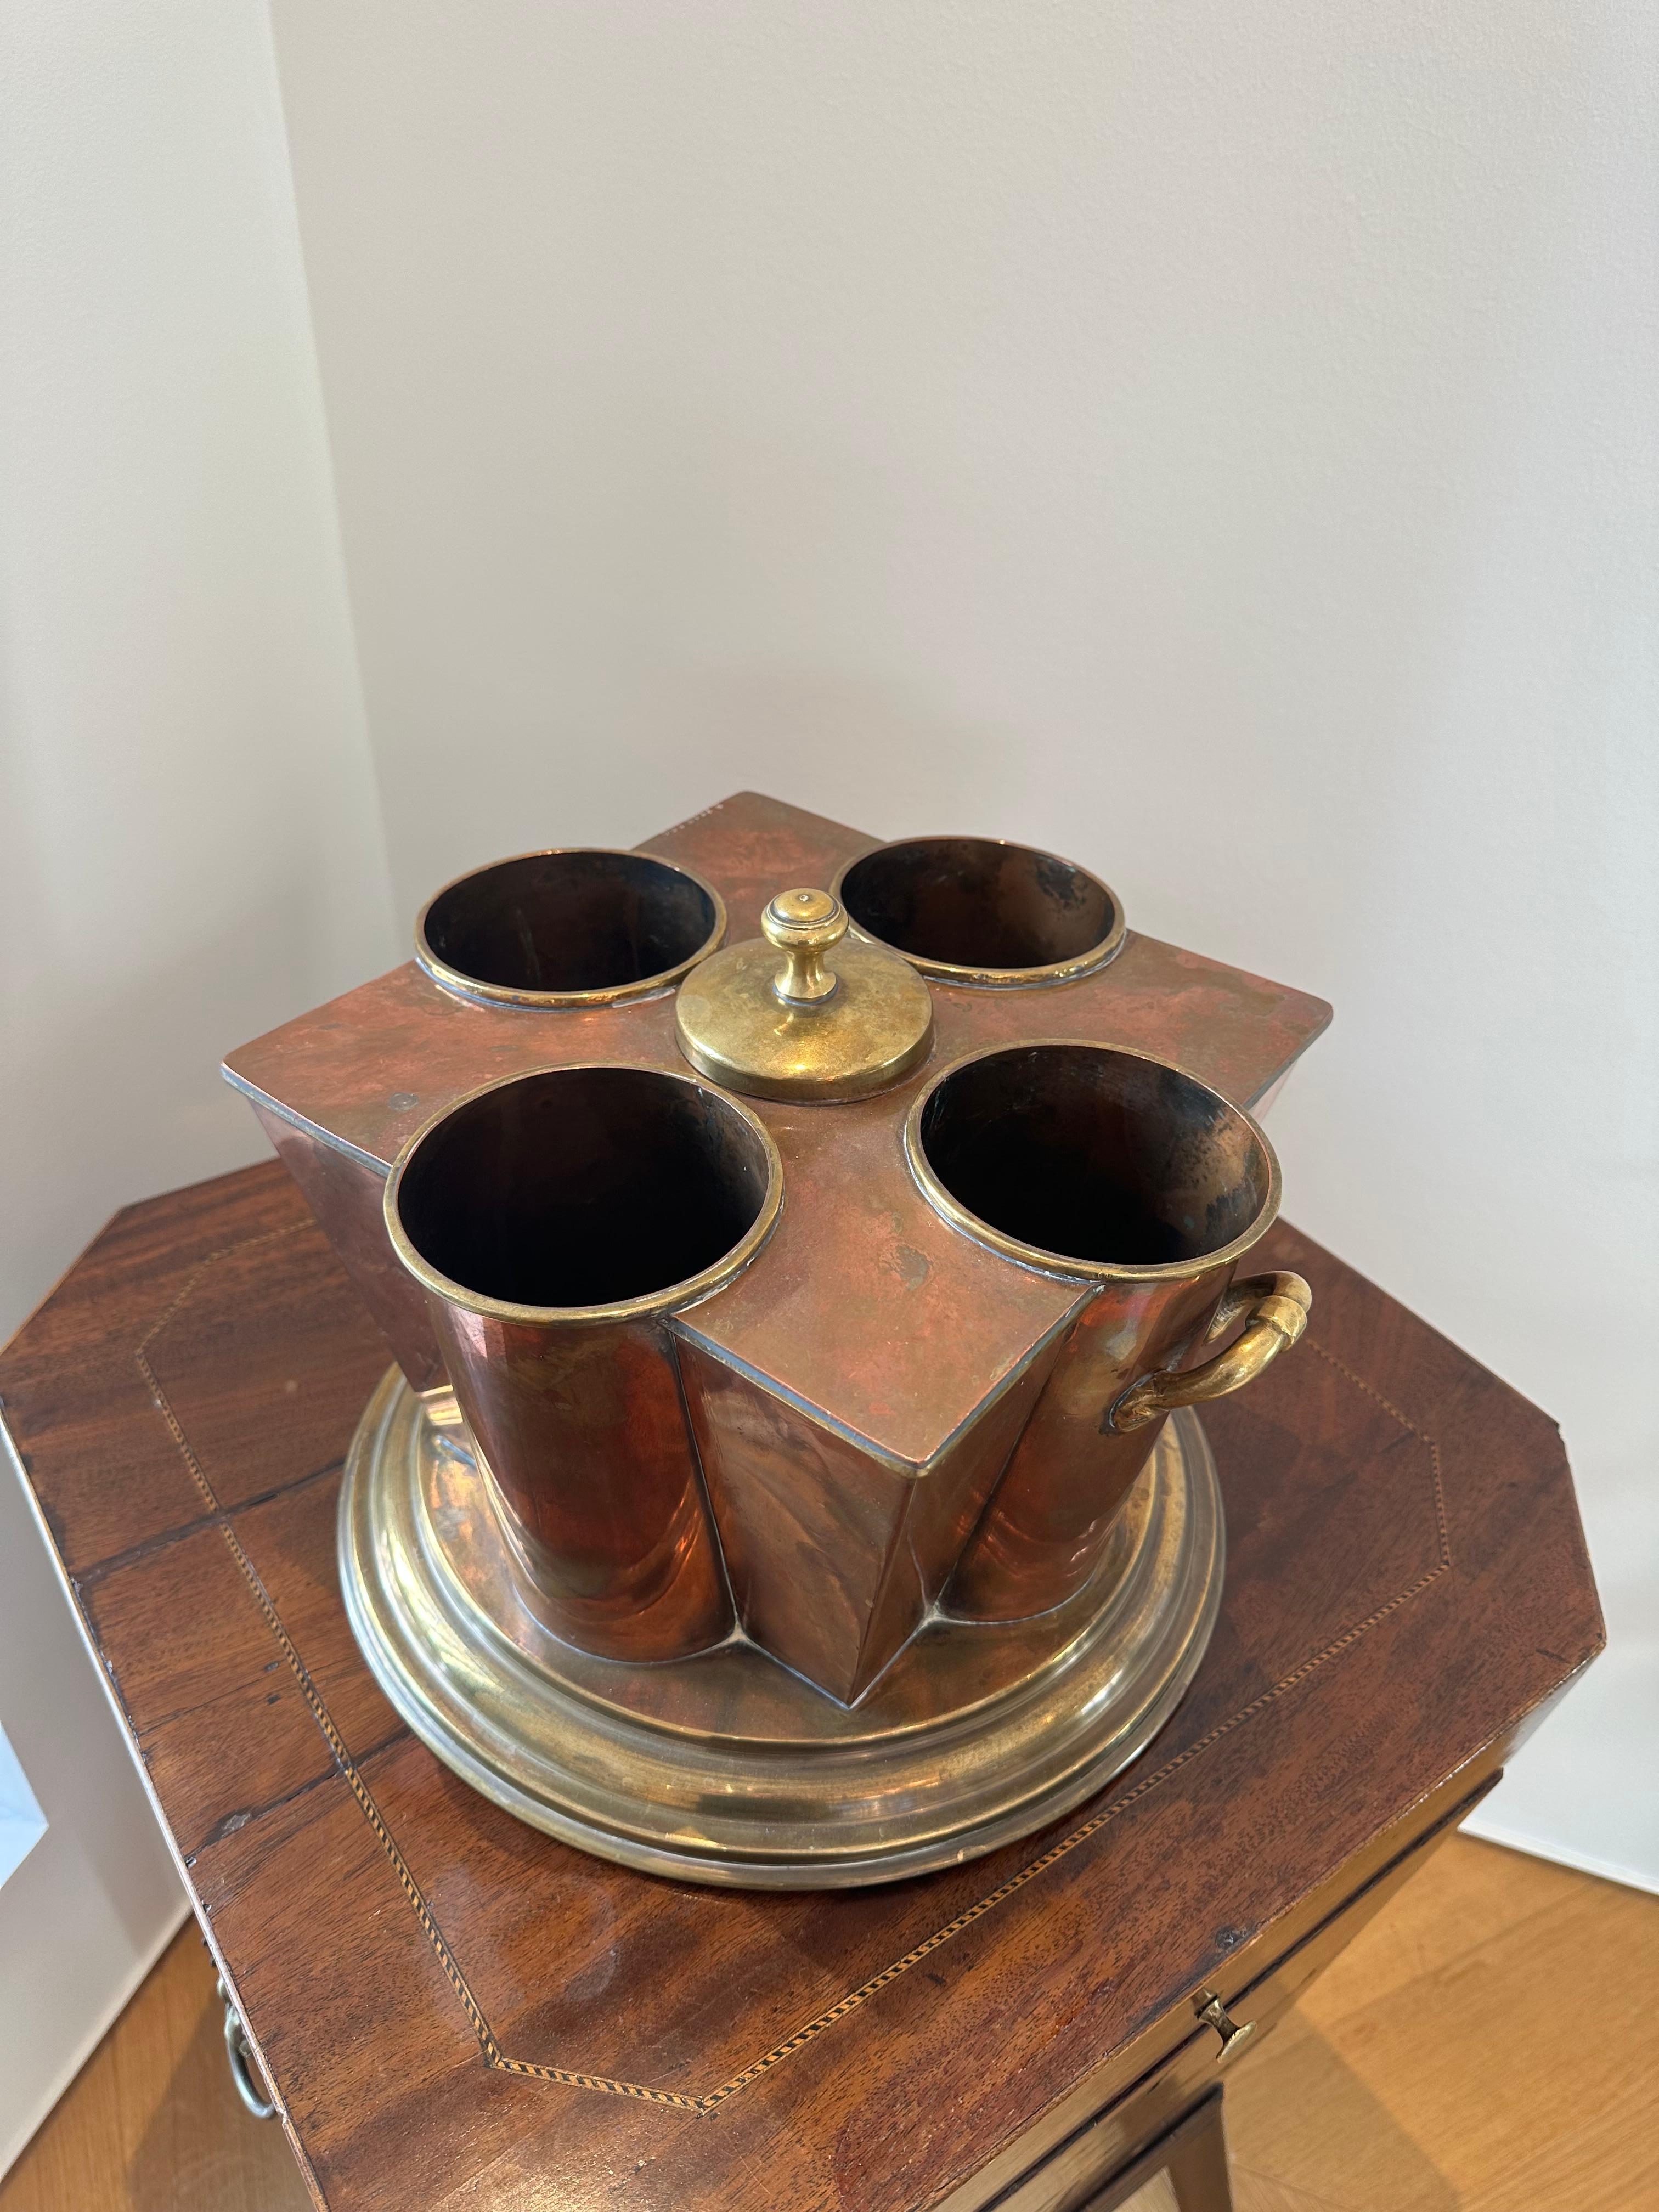 An Art Deco Style champagne cooler by G.Peak & Co, London. The tapering sides with four bottle apertures centered by an ice compartment with detachable cover, on stepped circular base, made of brass and copper.

